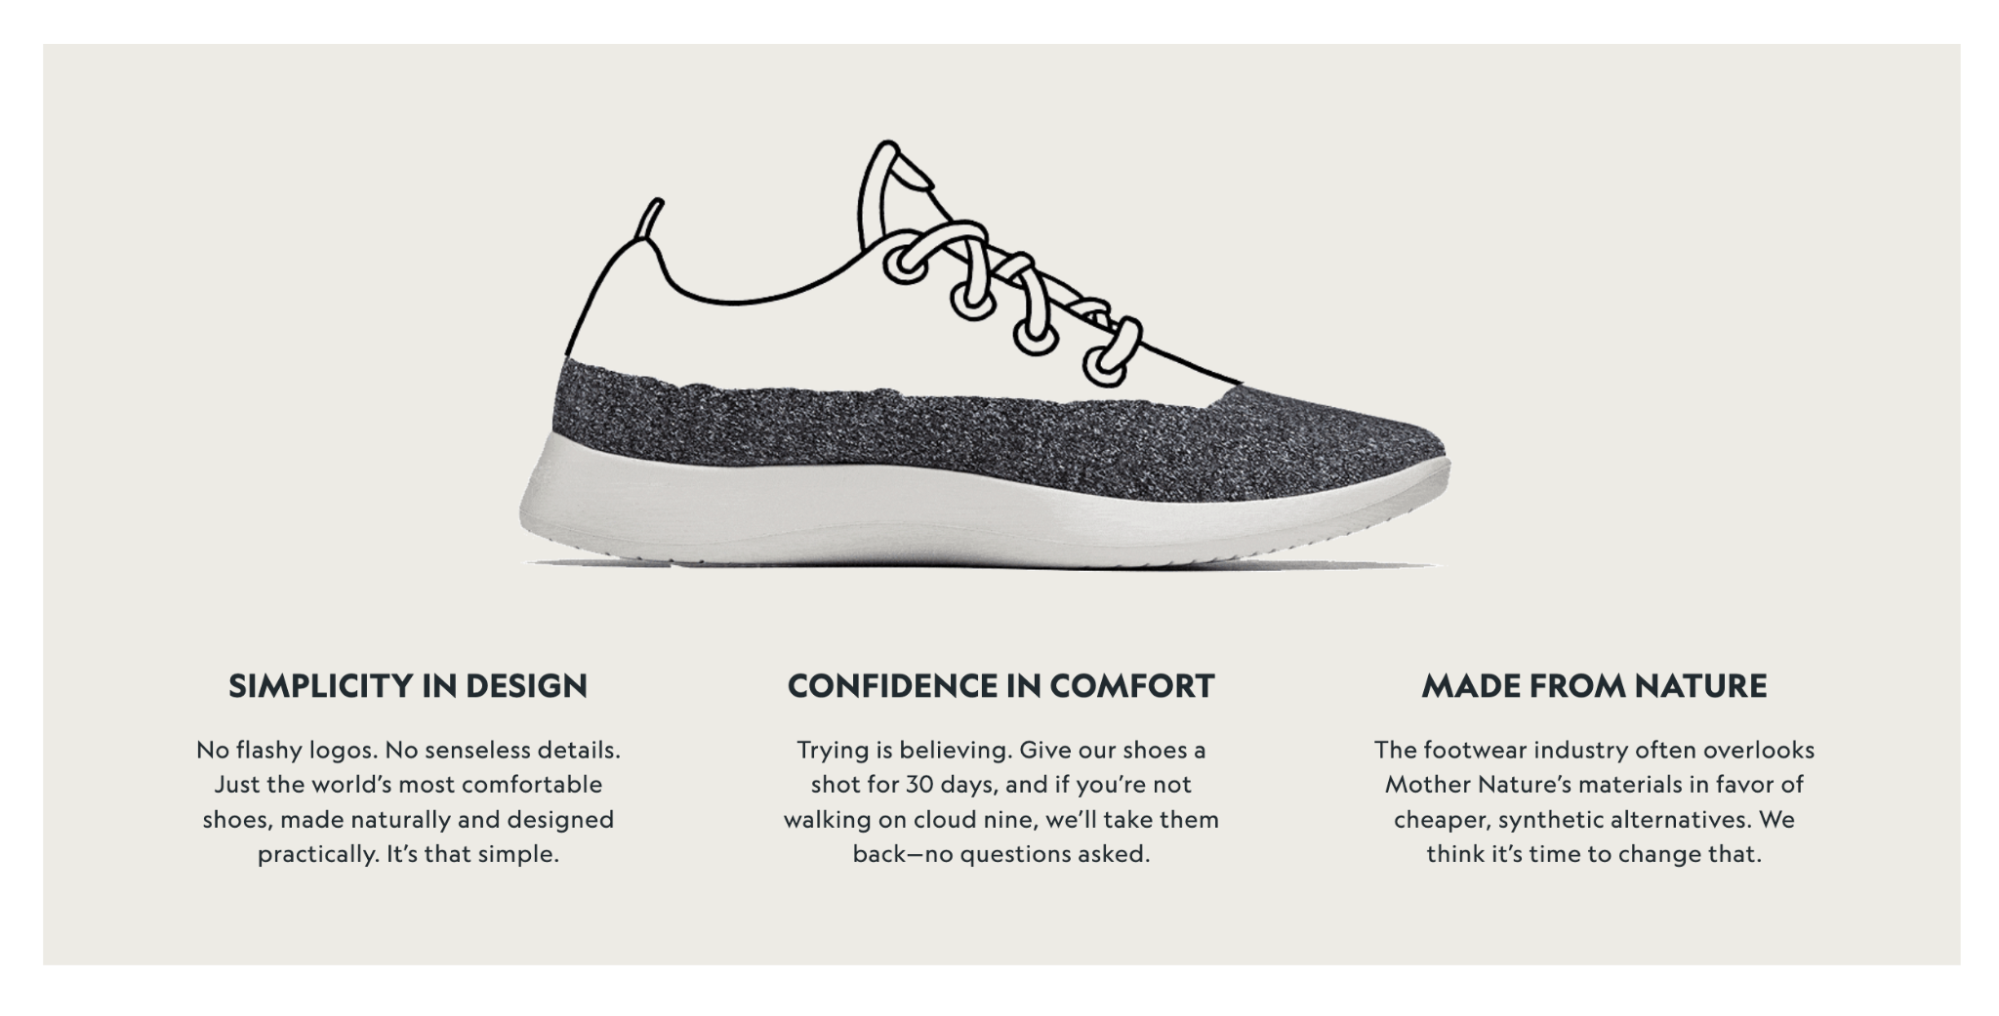 Screenshot of illustration from Allbirds About Us page showing illustration of shoe with textured fabric